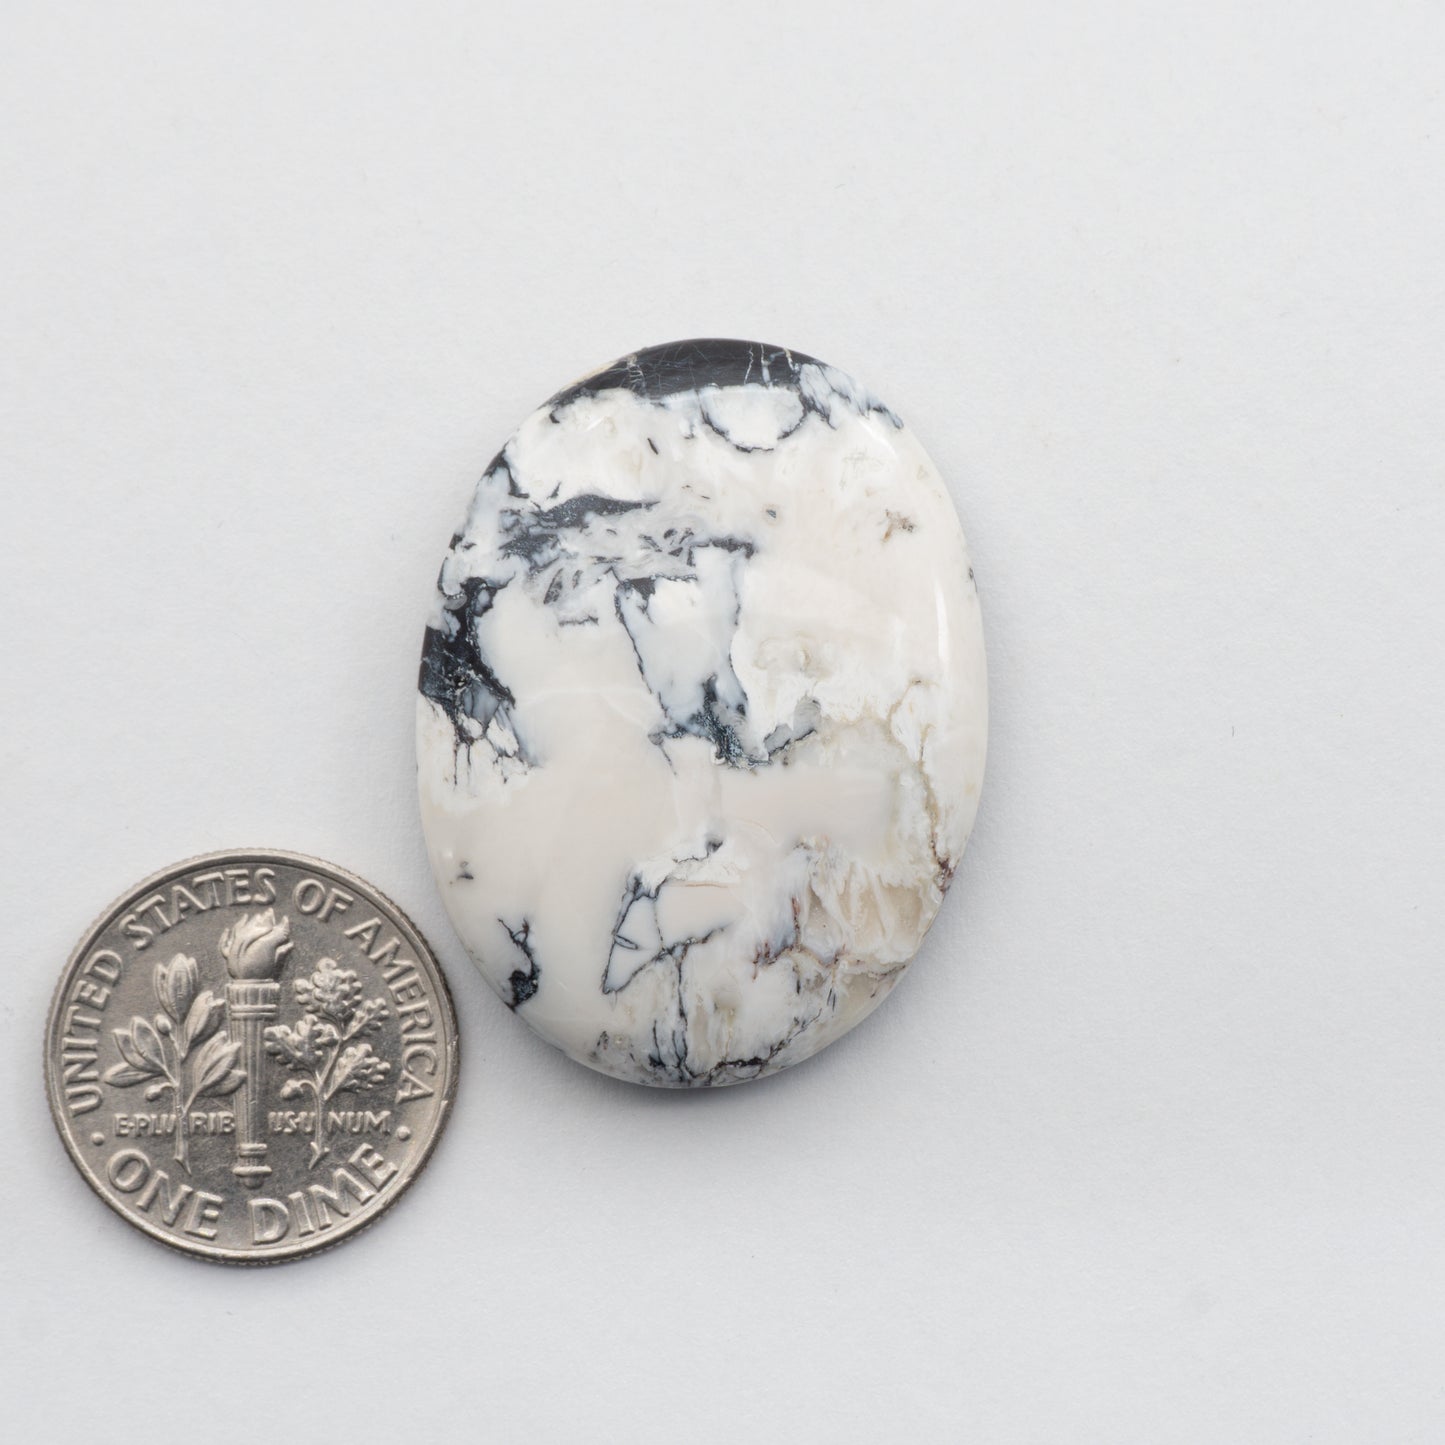 These Natural White Buffalo Cabochons have a glossy finish and are backed for added strength. Mined in Nevada, USA these stones are similar to turquoise used for jewelry making.